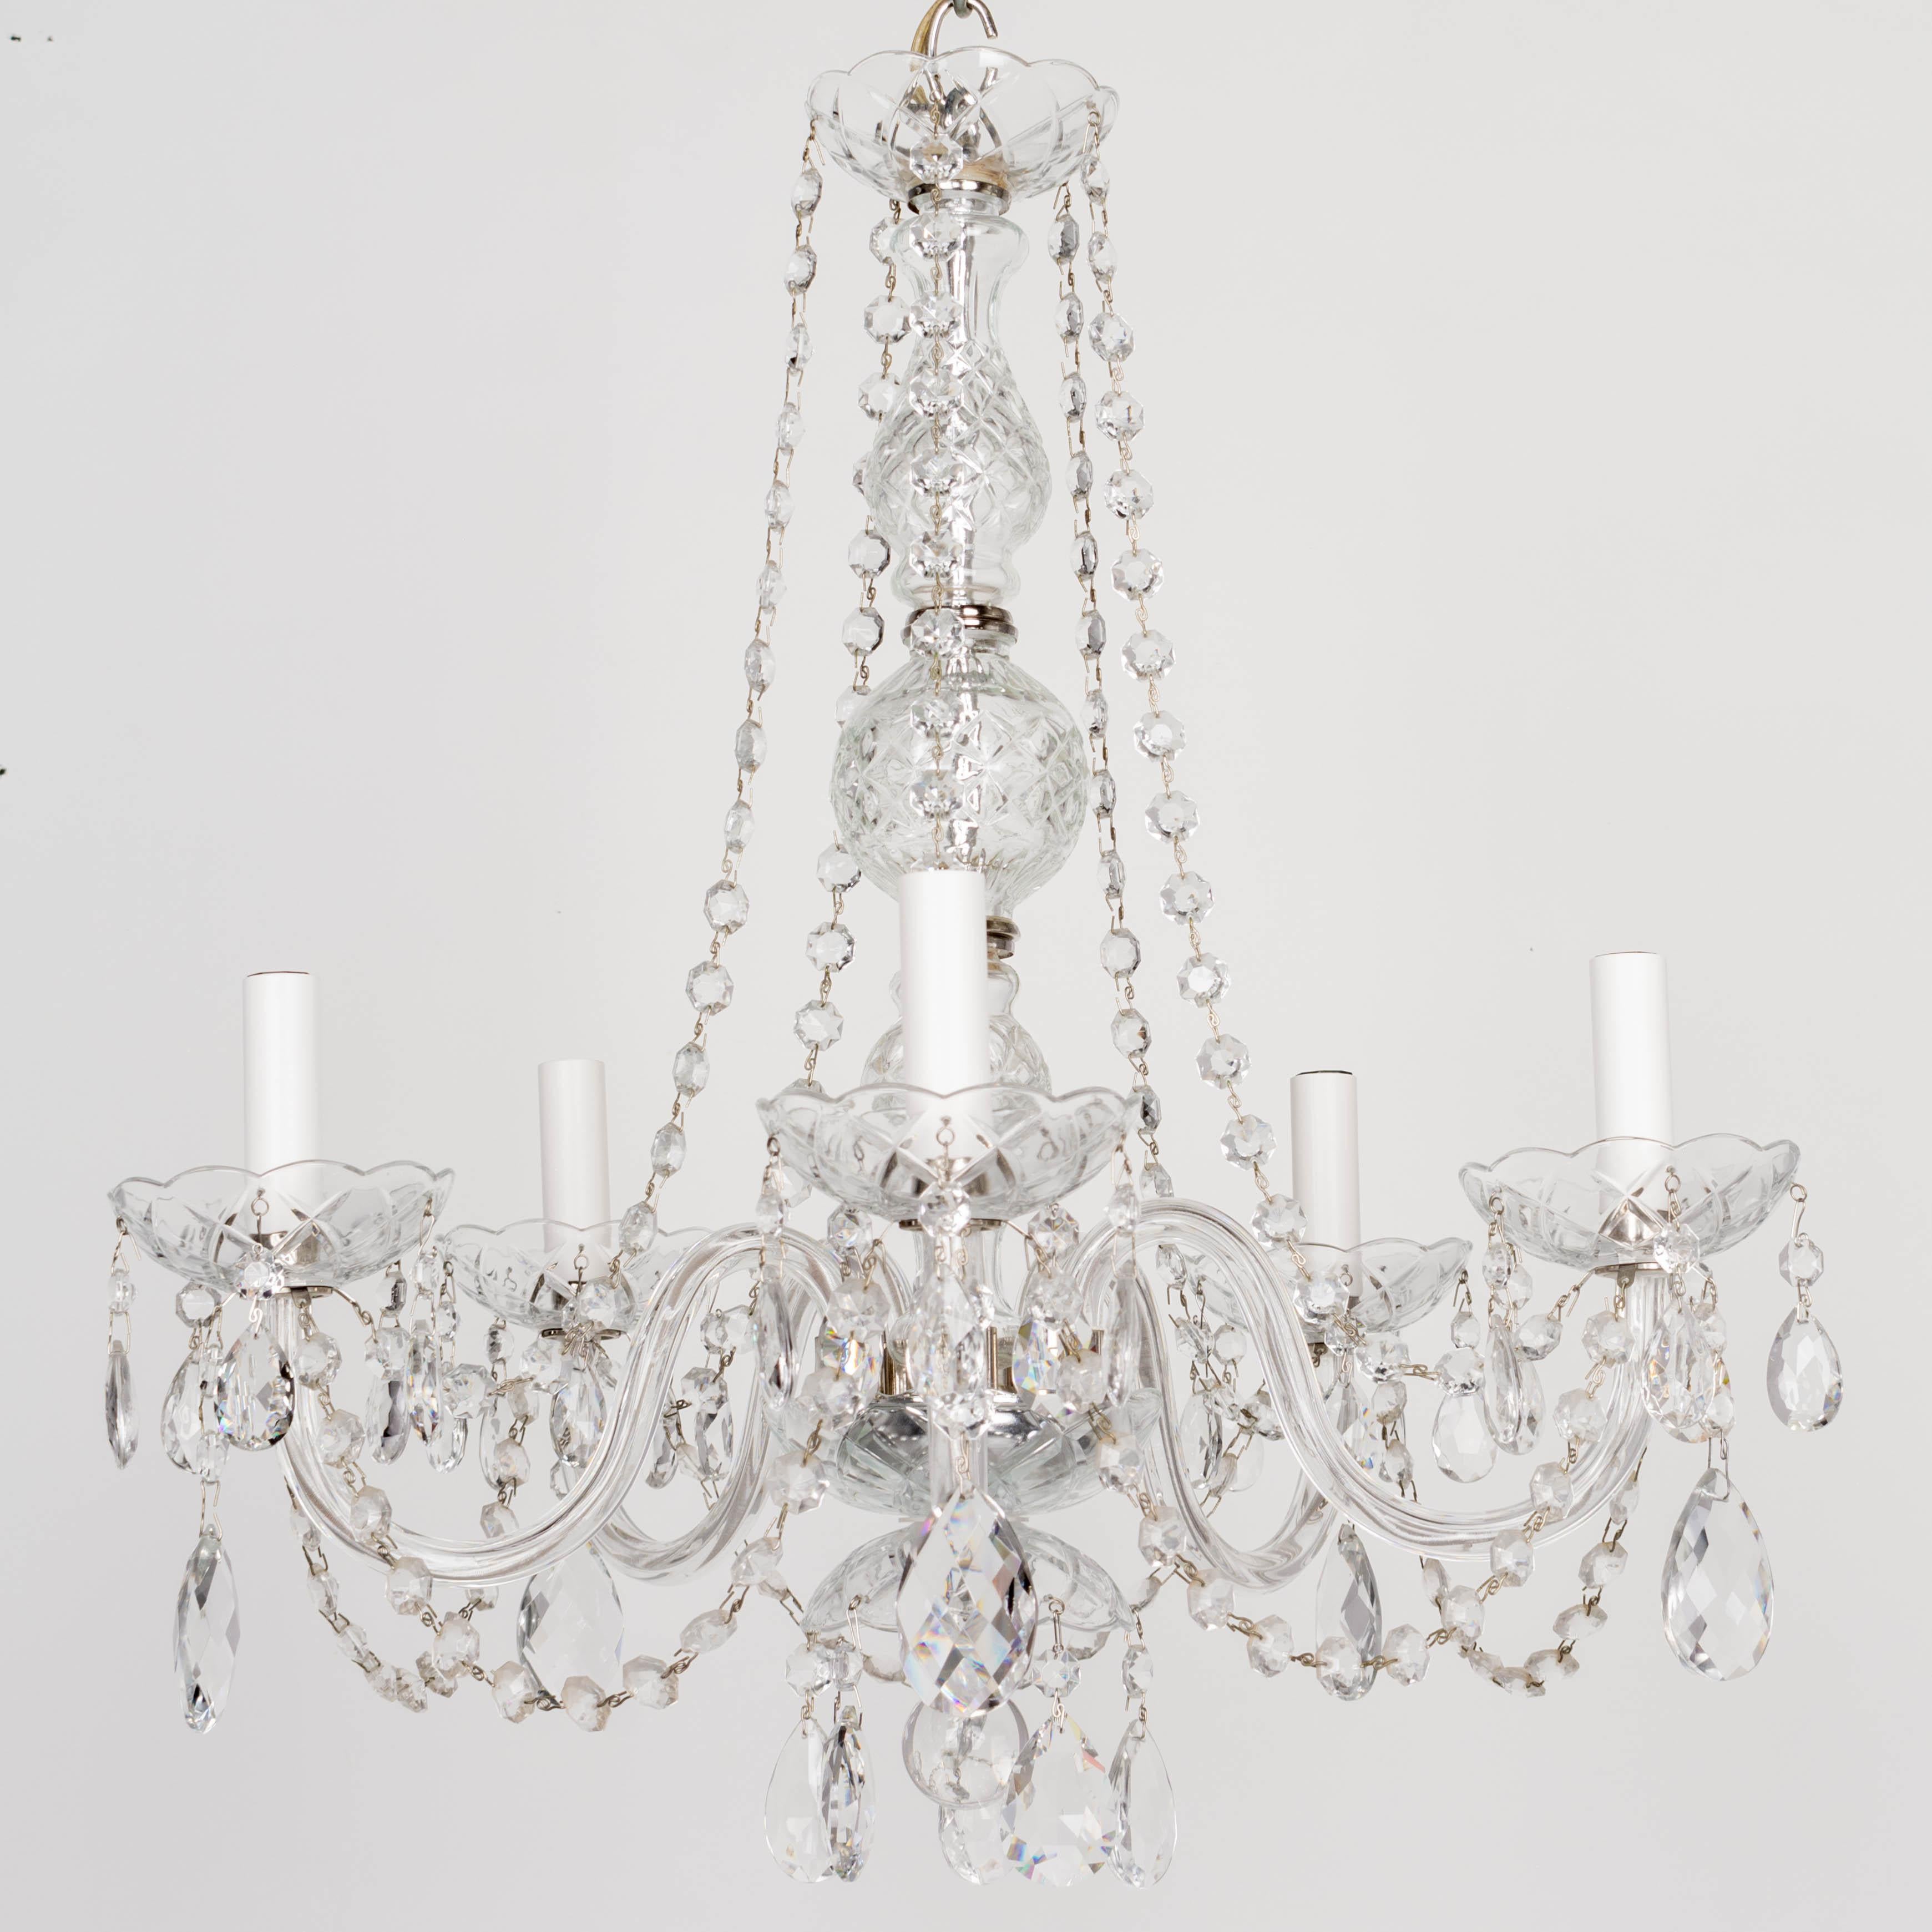 A vintage French five-light crystal chandelier with glass arms, cut glass bobeches and center column, hanging crystal prisms and faceted bead chain. In working condition. Circa 1970-1990. 22